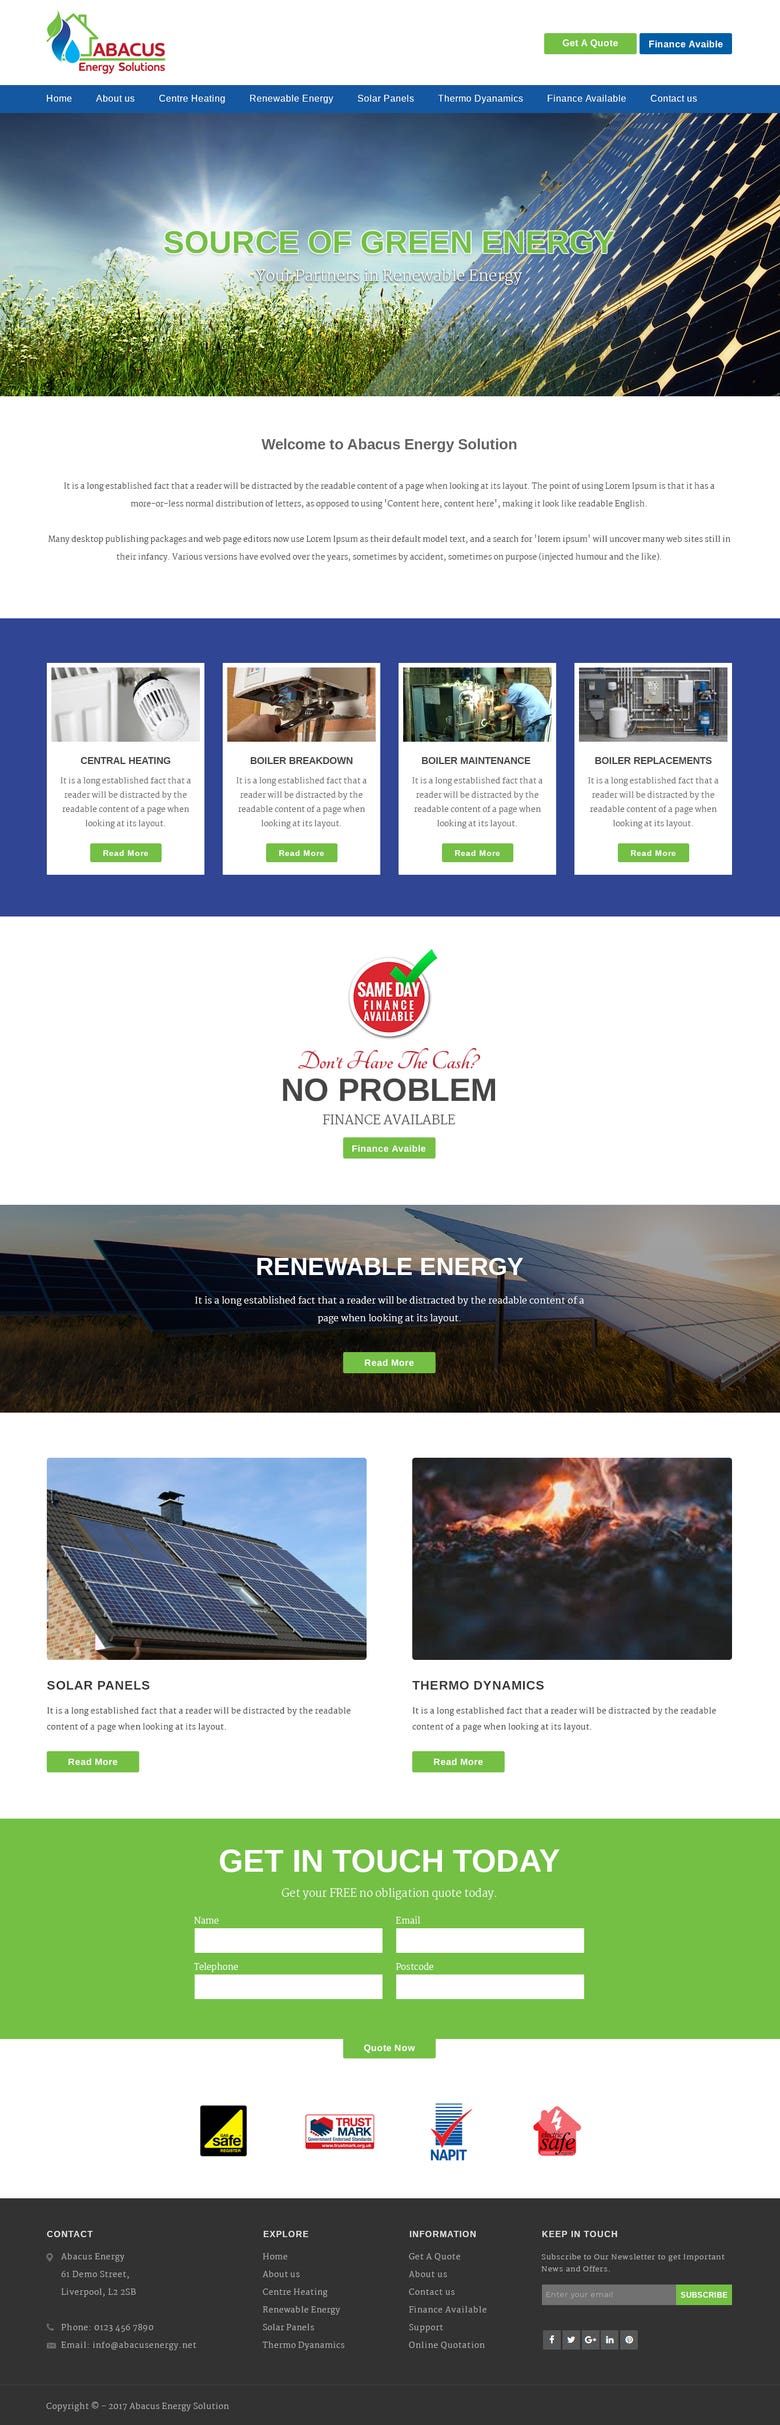 Abacus Energy Solution - http://abacusenergysolutions.co.uk